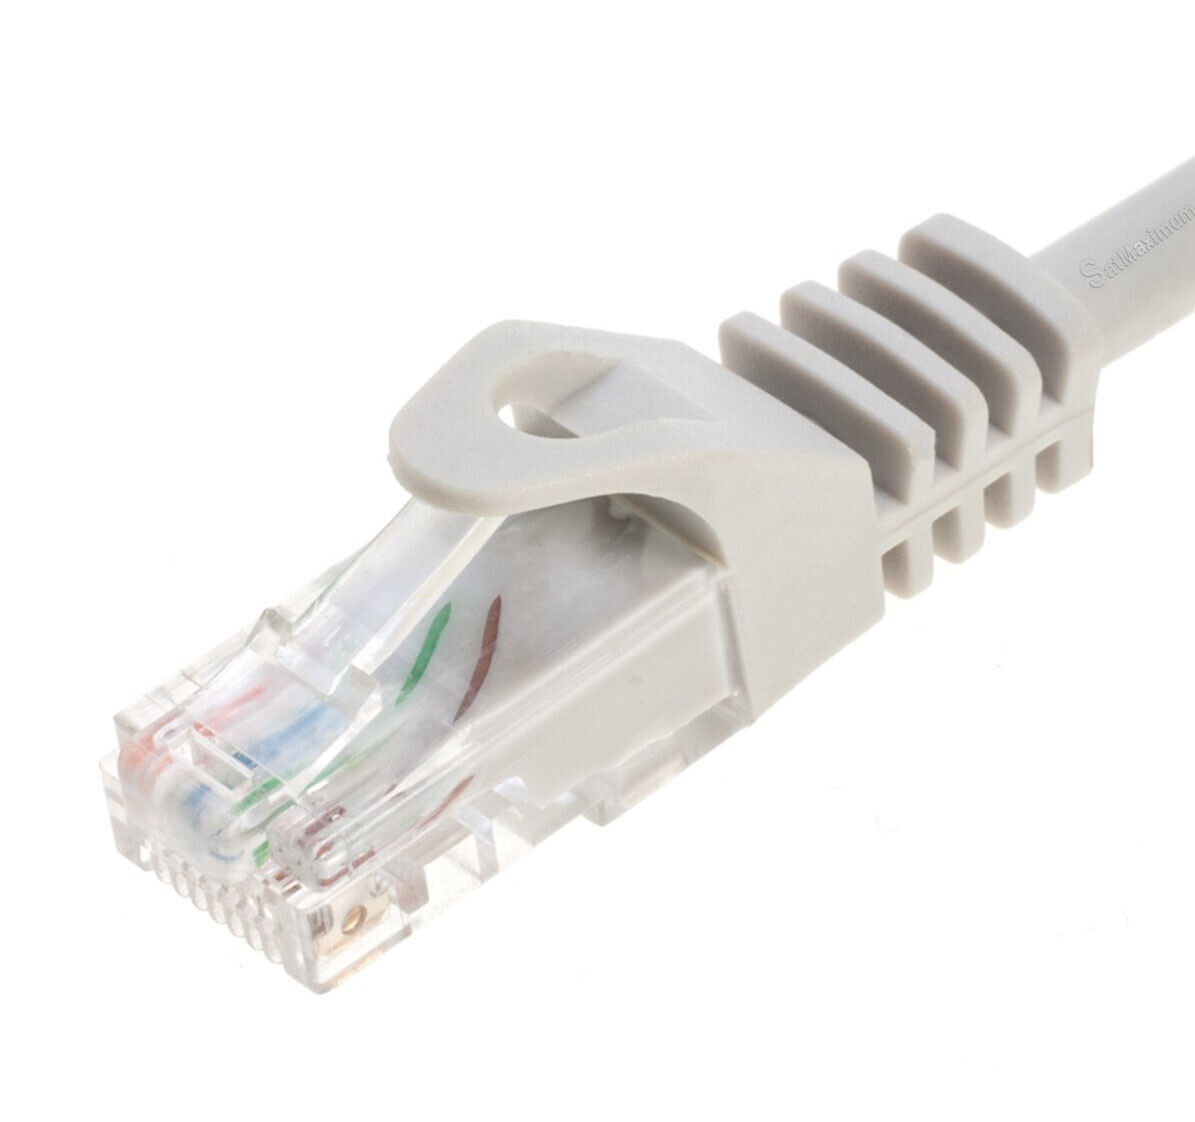 CAT5 Ethernet Patch Cable RJ-45 LAN Internet Cable Gray 1.5FT-20FT Multipack LOT